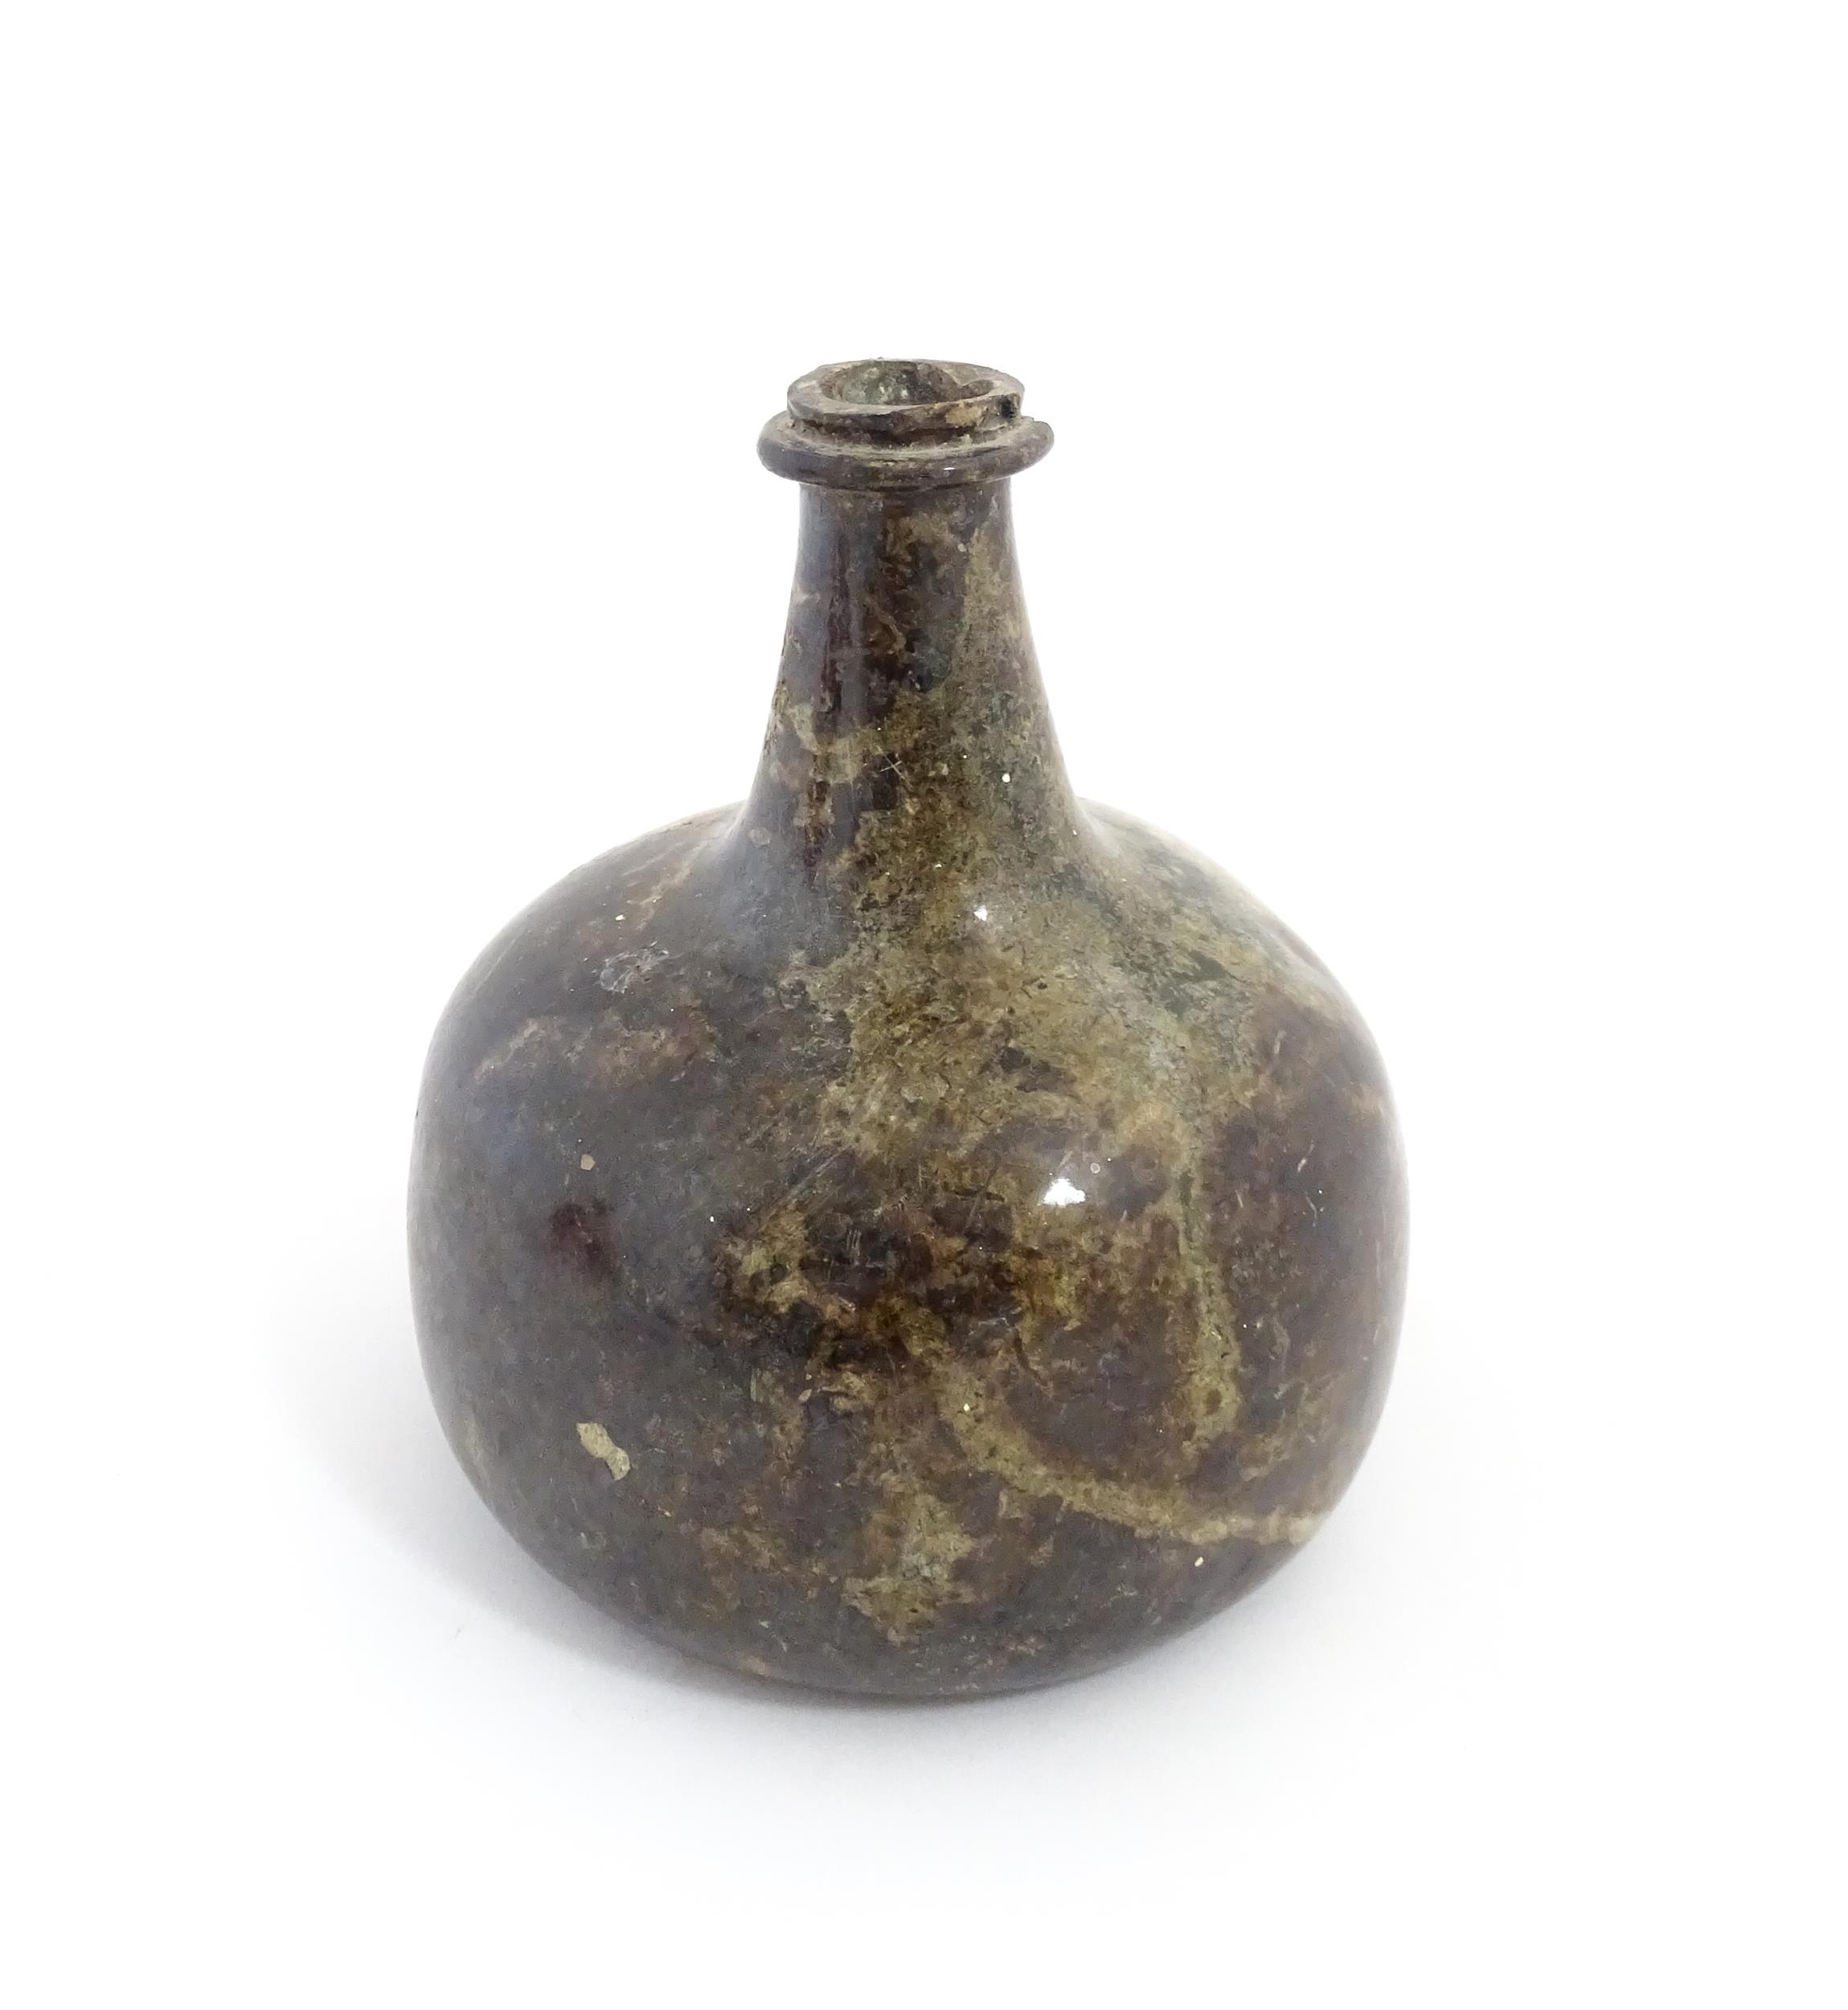 A late 18thC / early 19thC English dark olive green glass onion shape wine bottle. Approx. 6" high - Image 3 of 6